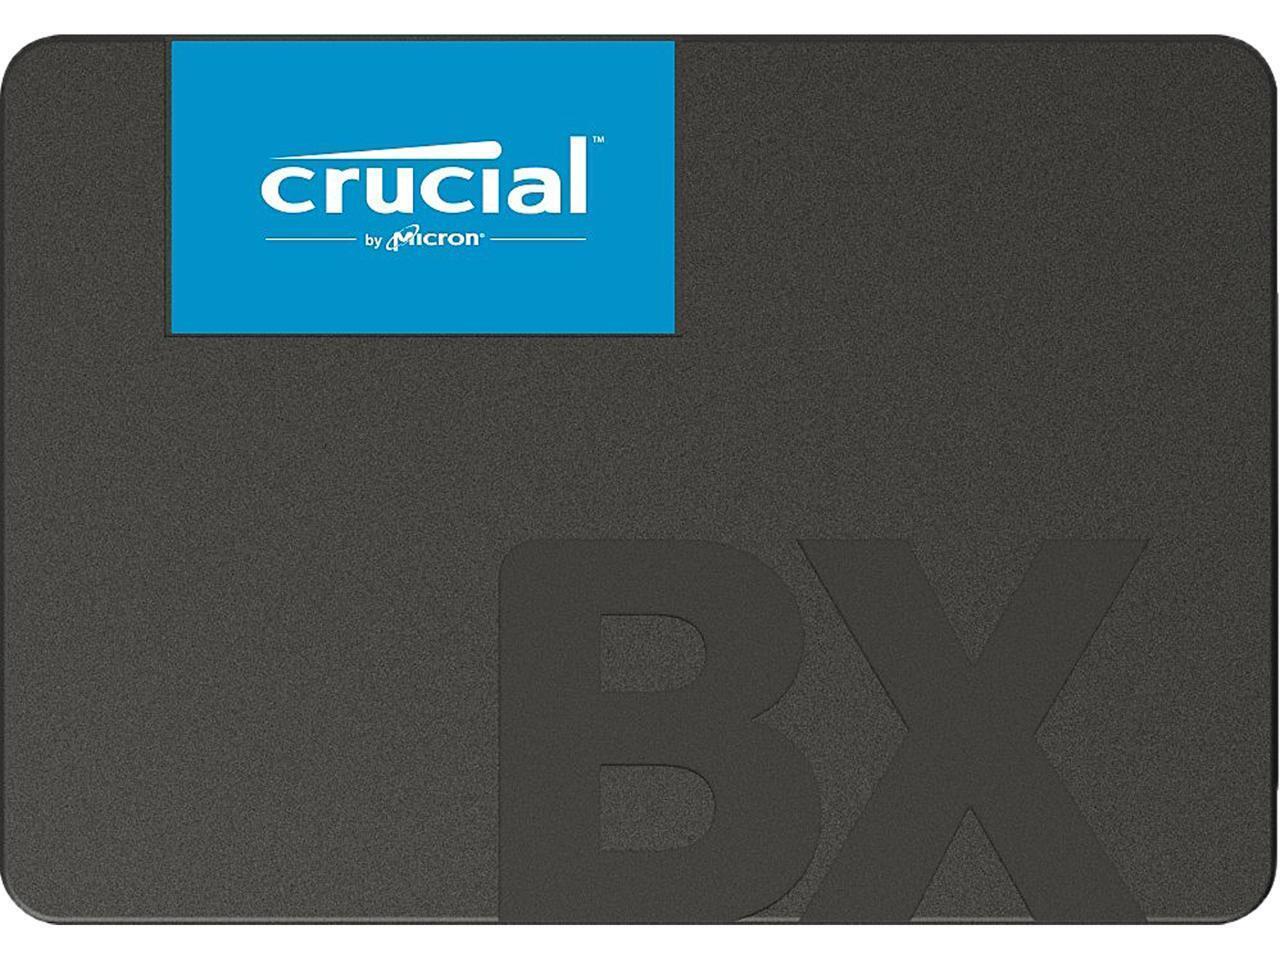 Crucial BX500 1TB 3D NAND SATA 2.5-Inch Internal SSD, up to 540 MB/s